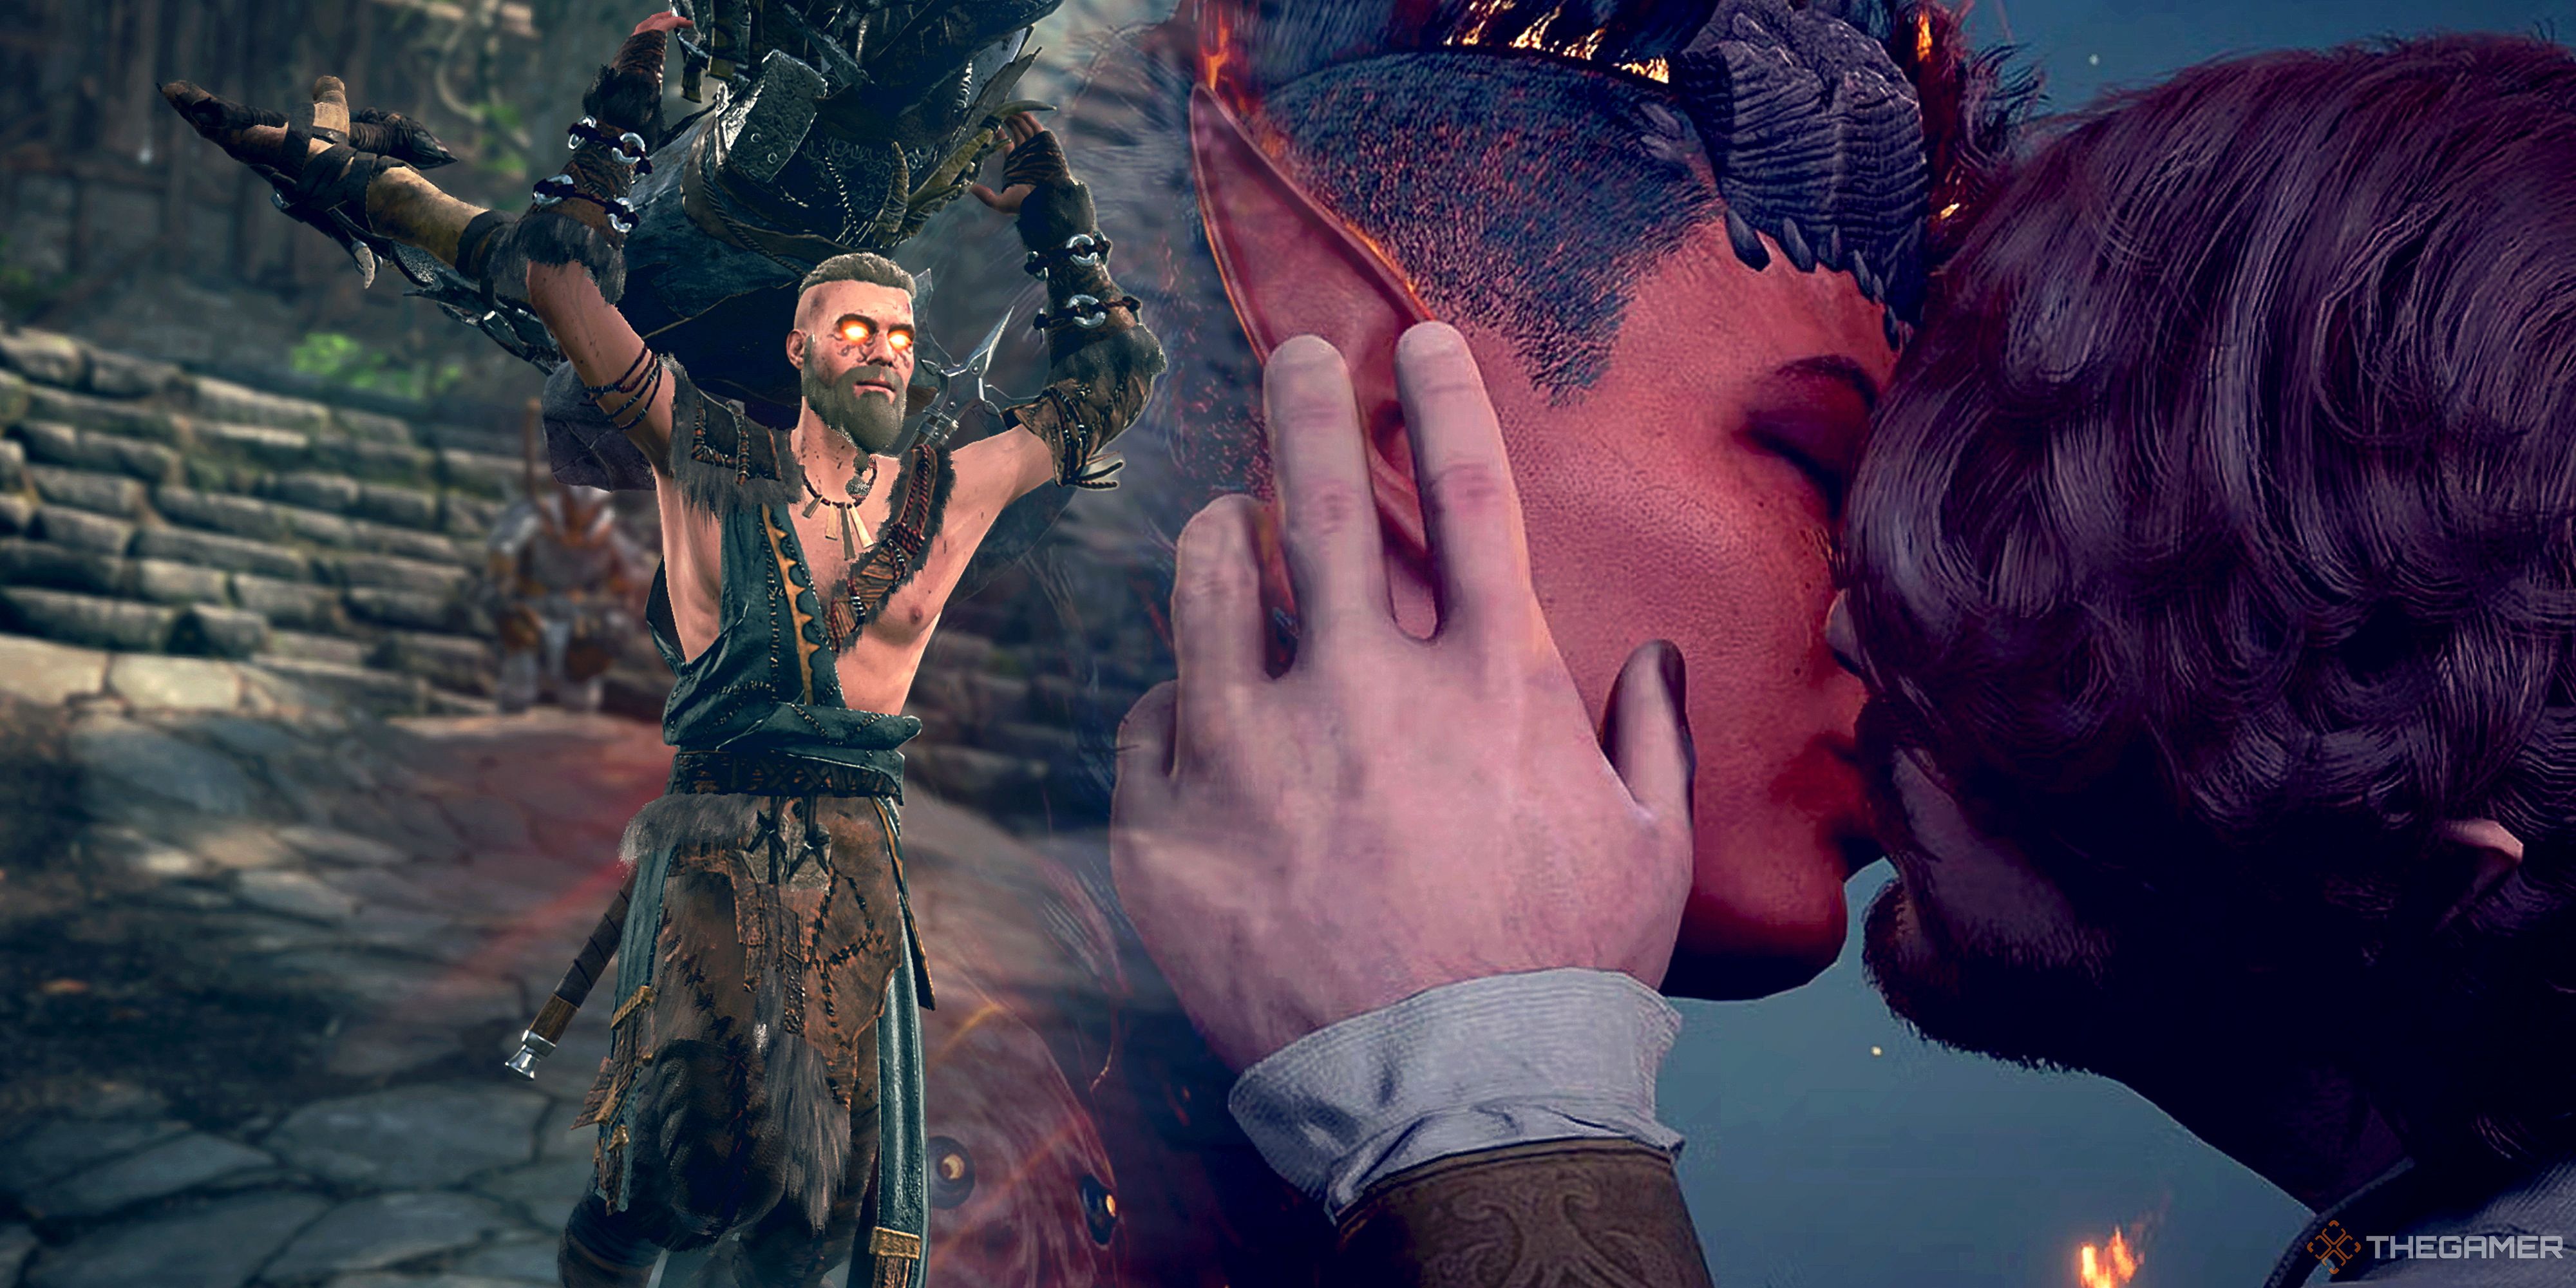 Left: a character in Baldur's Gate 3 preparing to fight. Right: two characters kissing. 